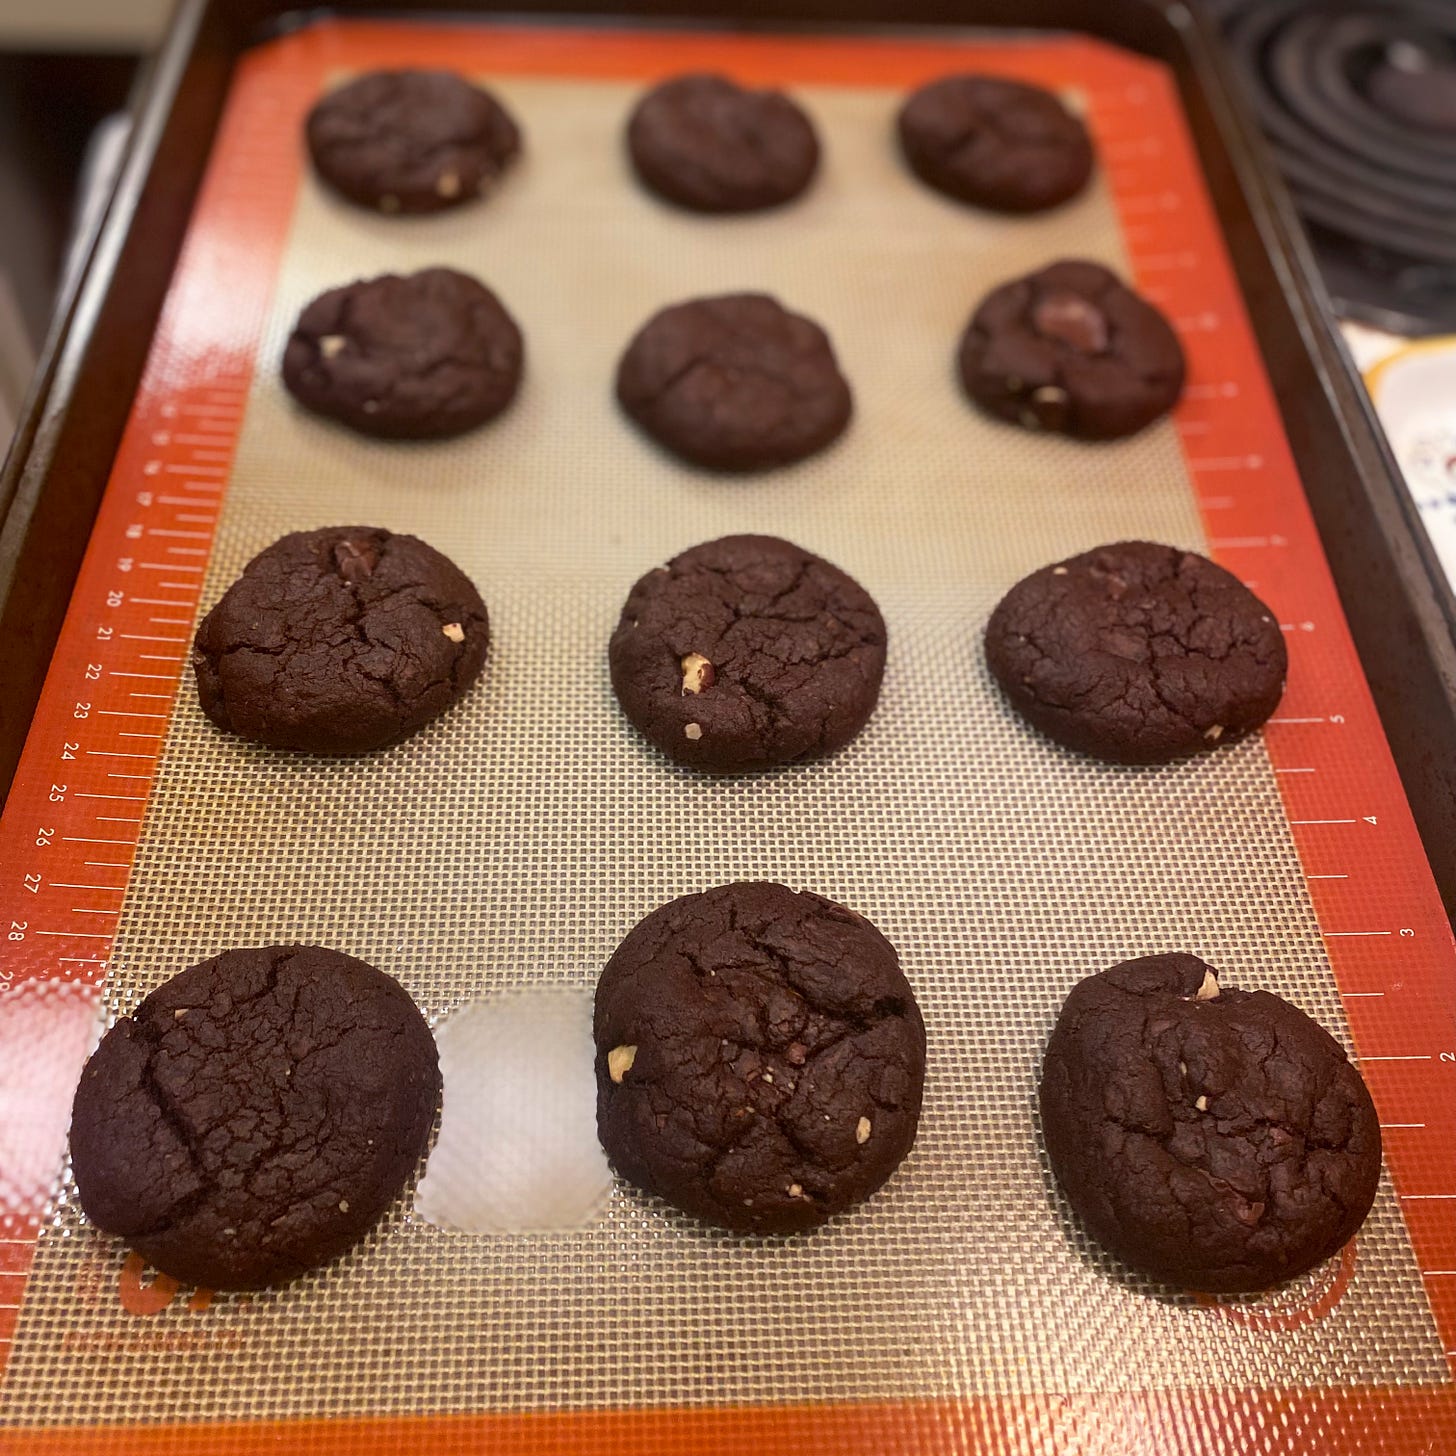 On a baking sheet lined with a silpat, a dozen double chocolate cookies with bits of hazelnut visible throughout. 